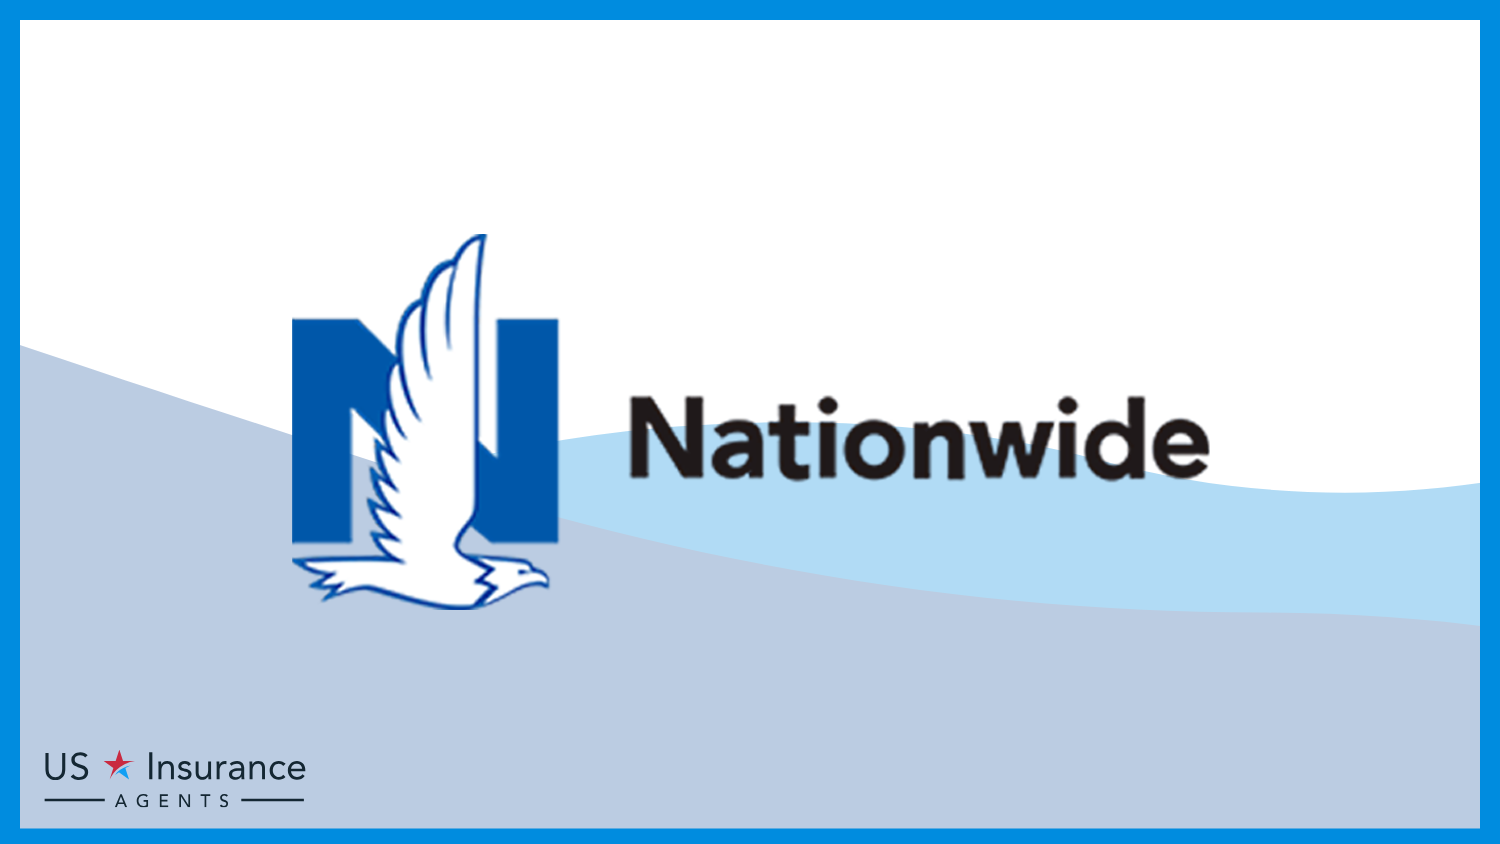 Nationwide: Best Car Insurance for Young Adults